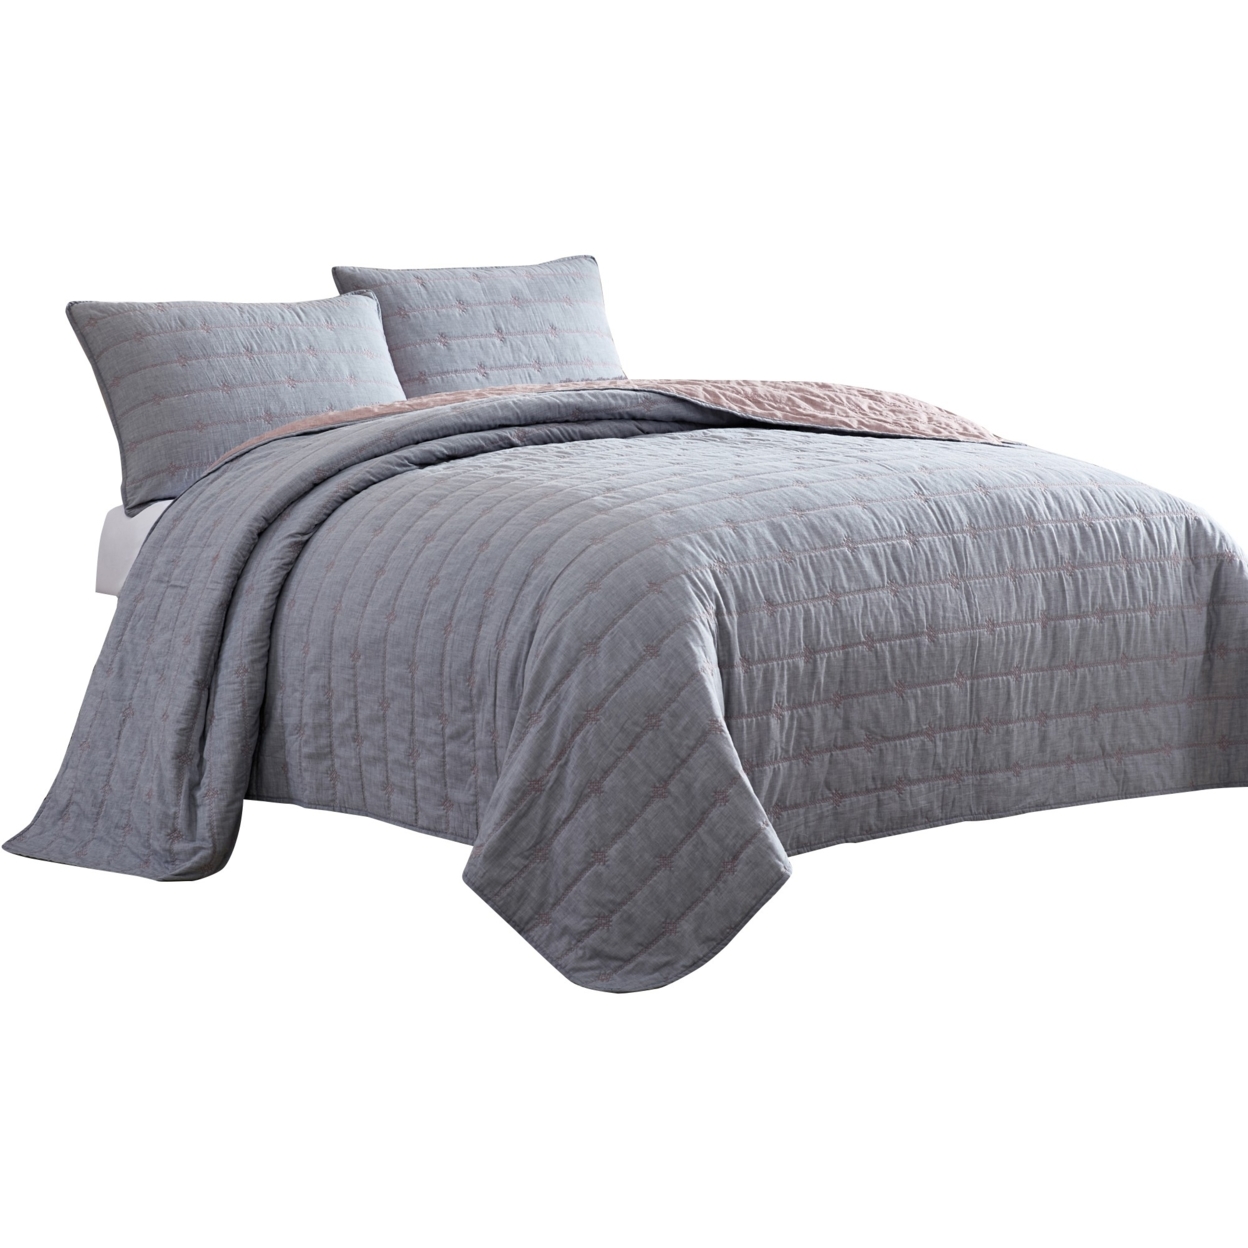 Veria 3 Piece Queen Quilt Set With Channel Stitching The Urban Port, Gray And Pink- Saltoro Sherpi